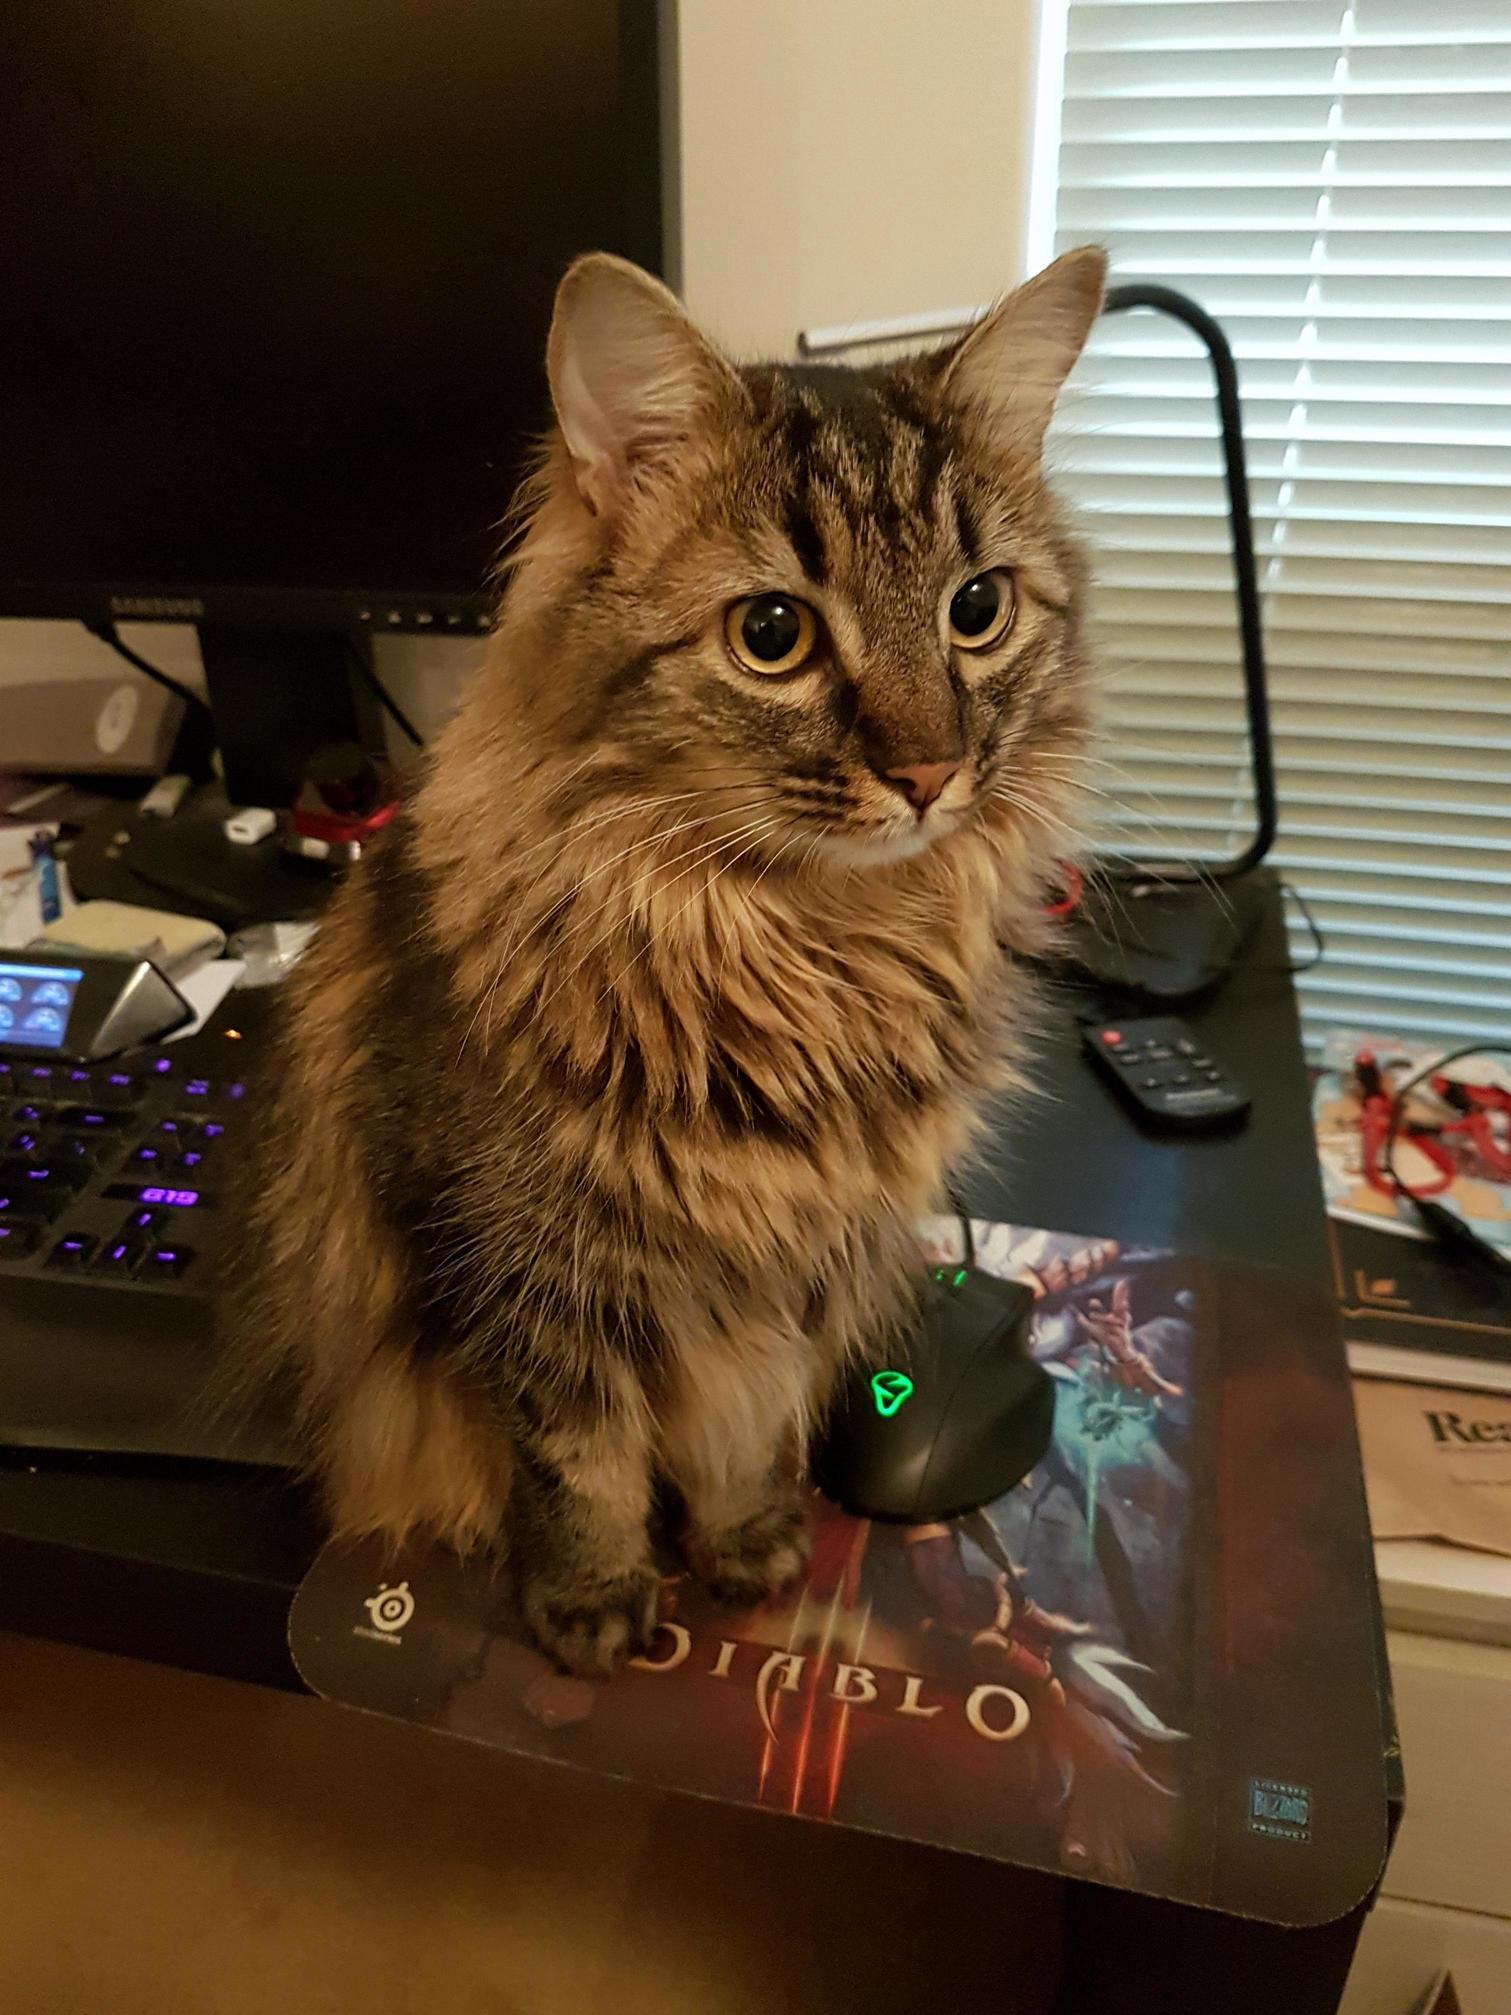 Human floof has captured the one you call the mouse . fetch the rewards of the edible nature at once